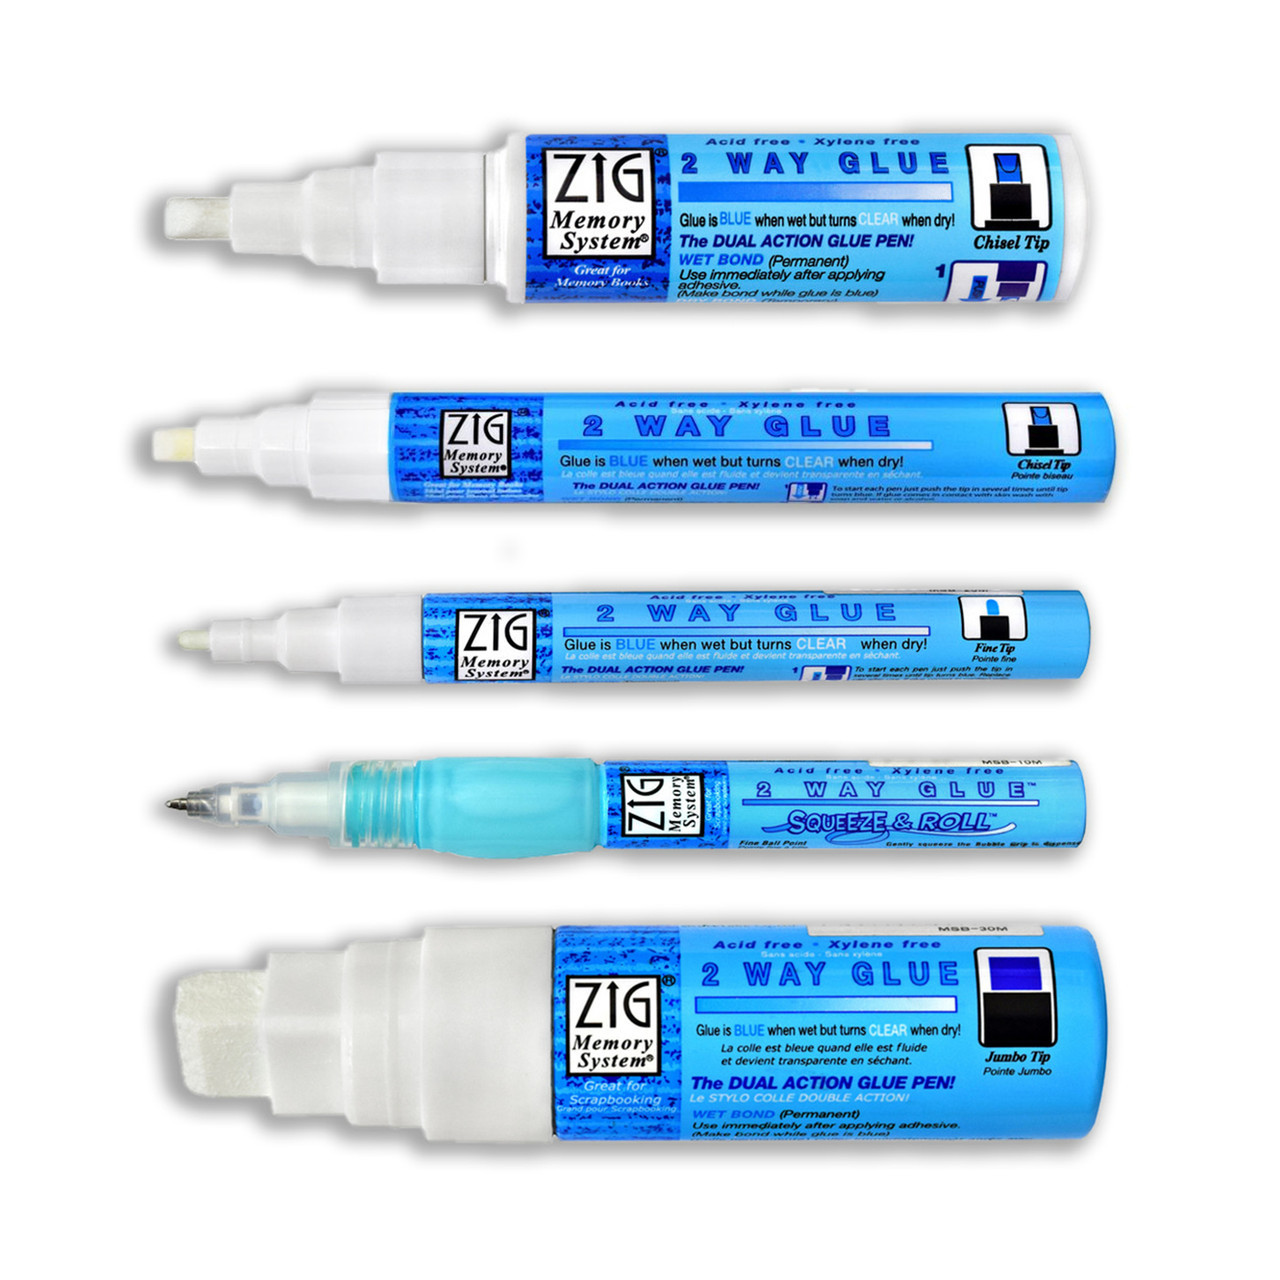 Kuretake Zig 2 Way Glue, 2mm Fine Tip 3 pcs Set, AP-Certified, Adhesive for  Kids, Artists, Crafters, Family, Perfect for Scrapbooking, Craft, Card